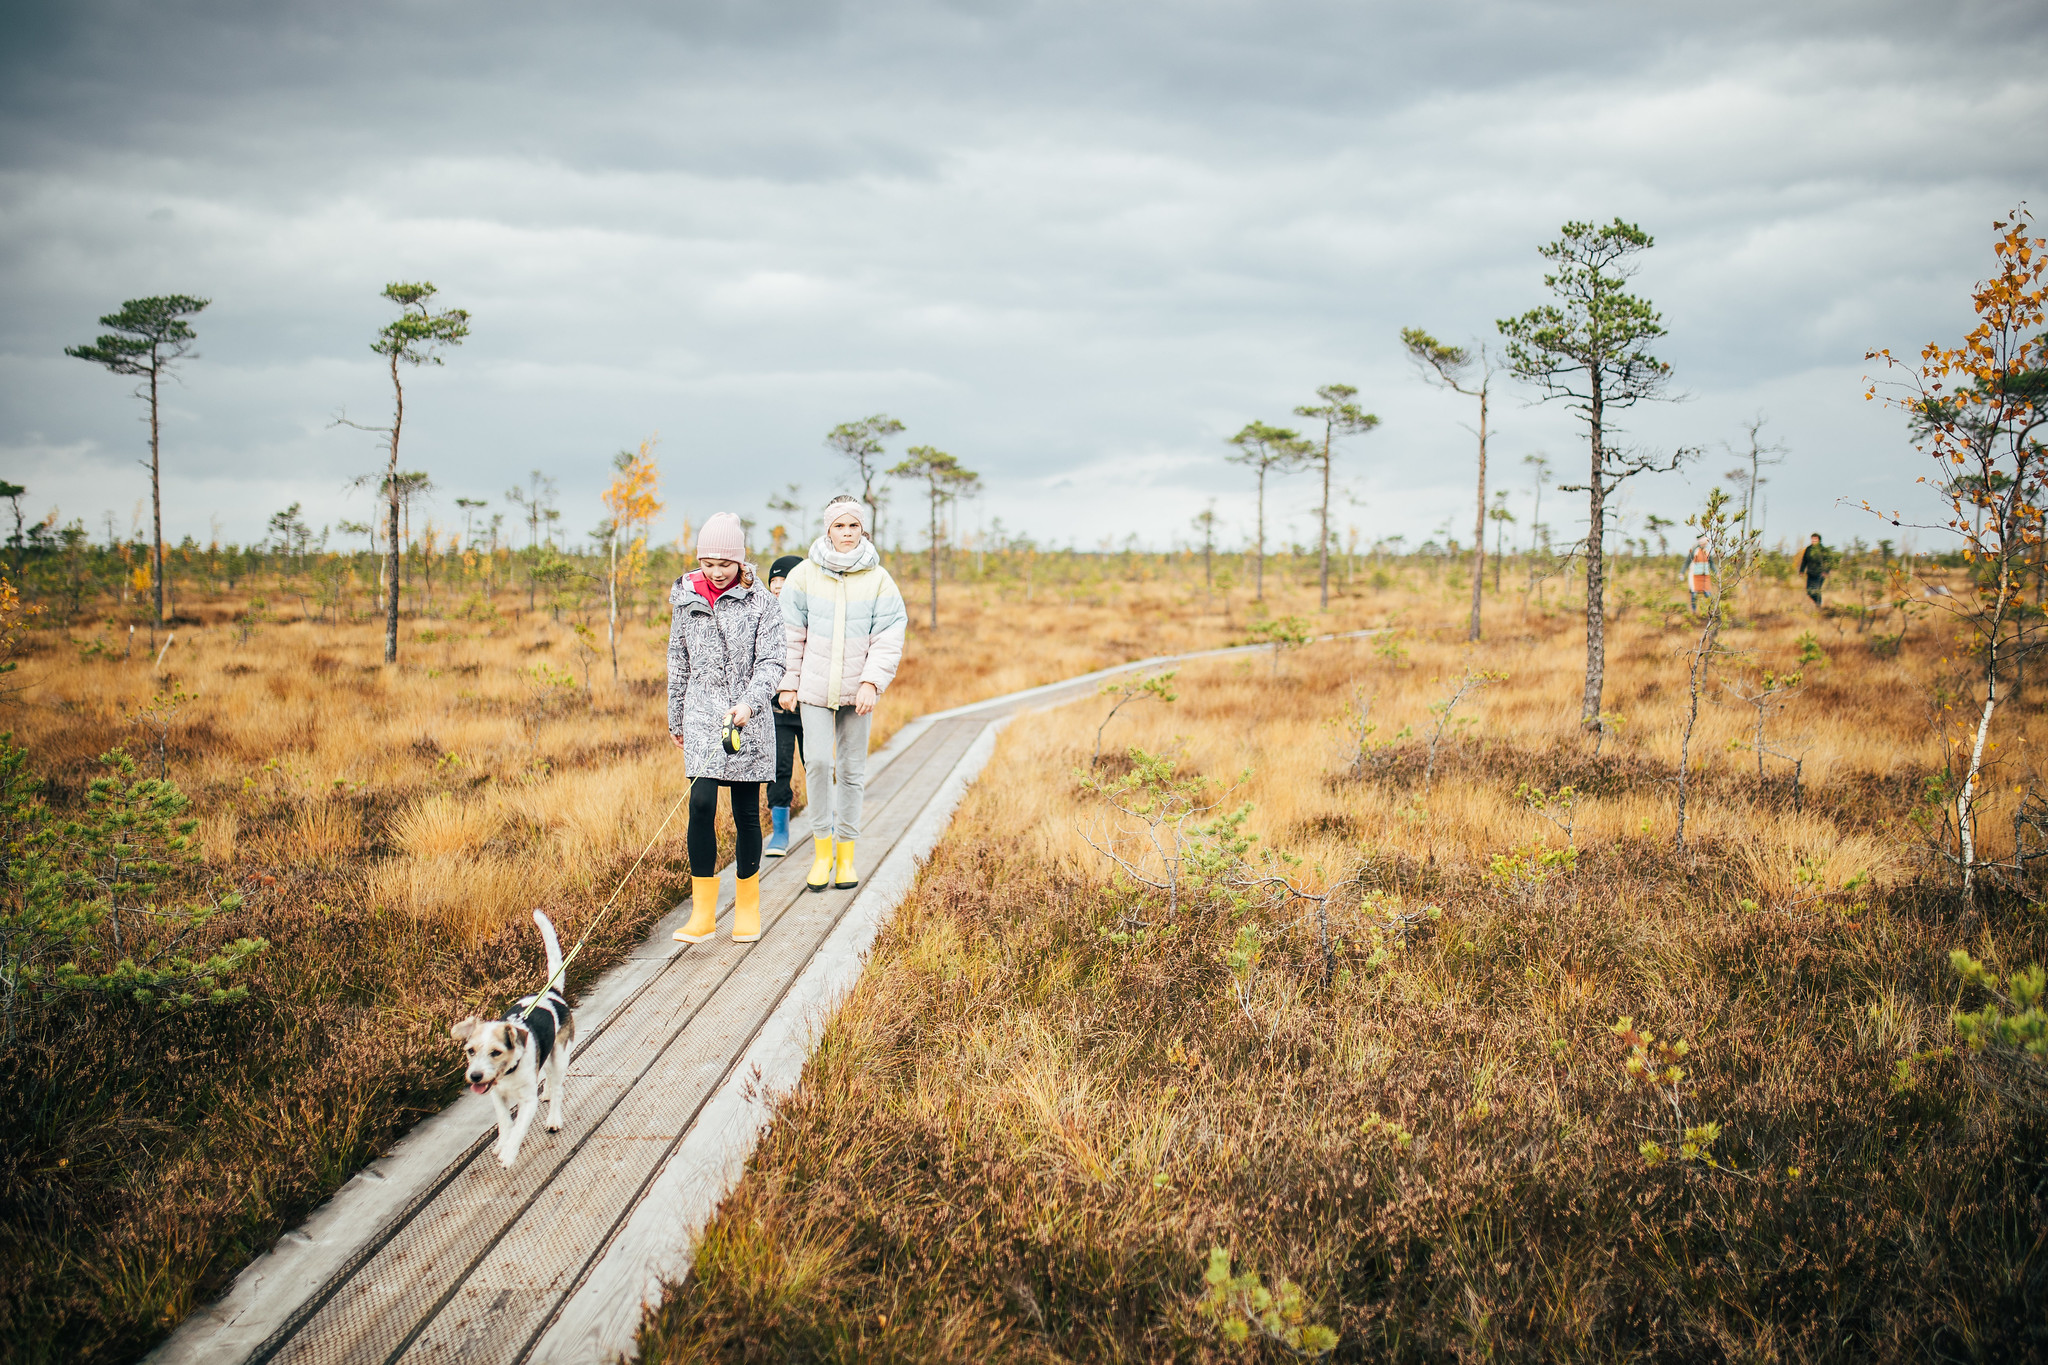 Children go hiking on a board walk in the bog with a dog.